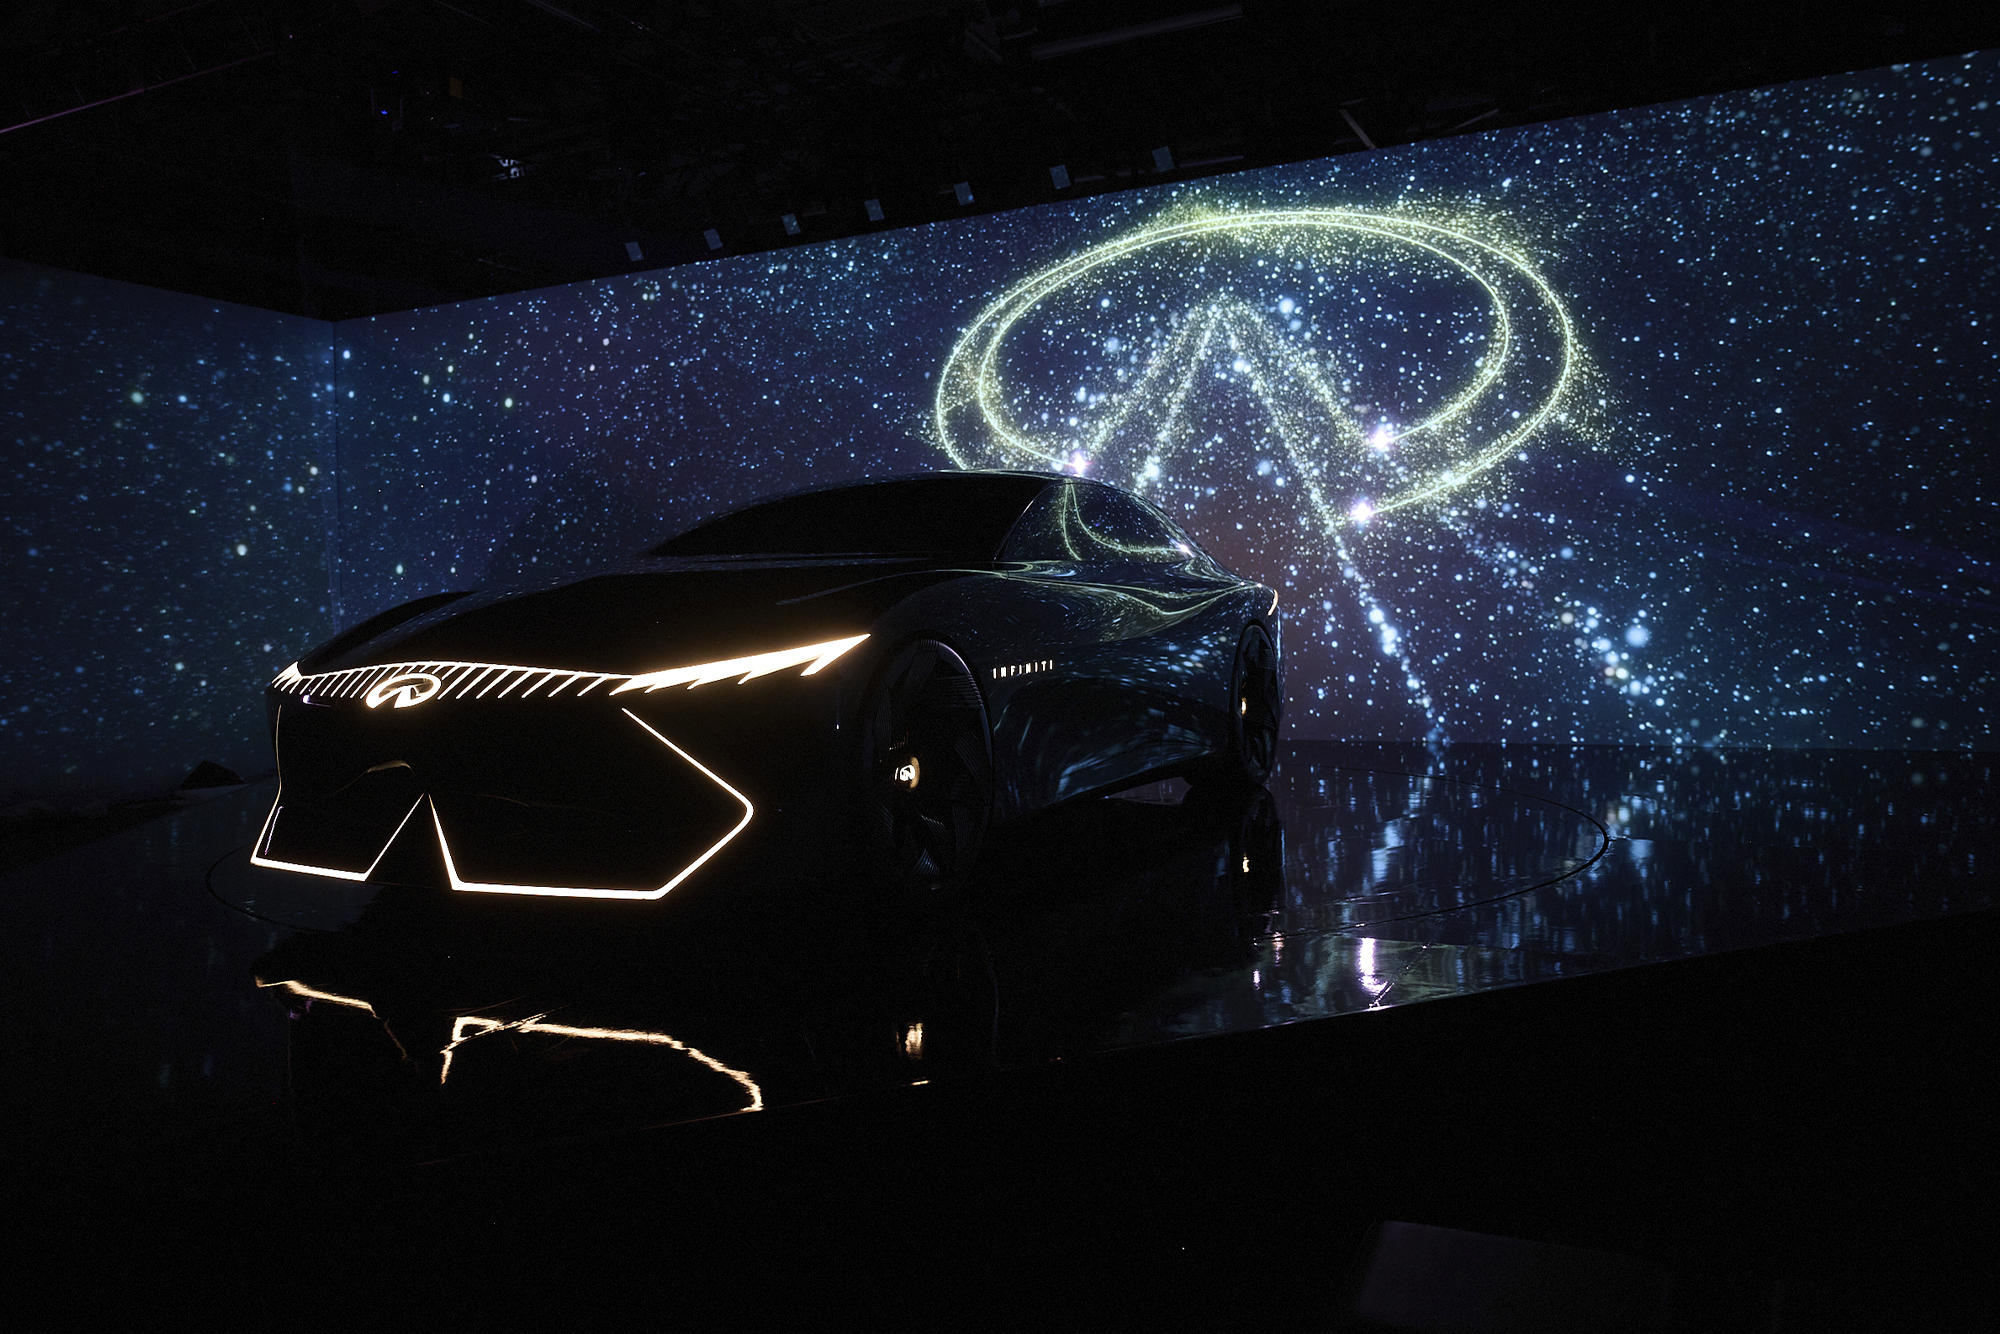 Infiniti Vision Qe on a stage with infiniti logo in. the back